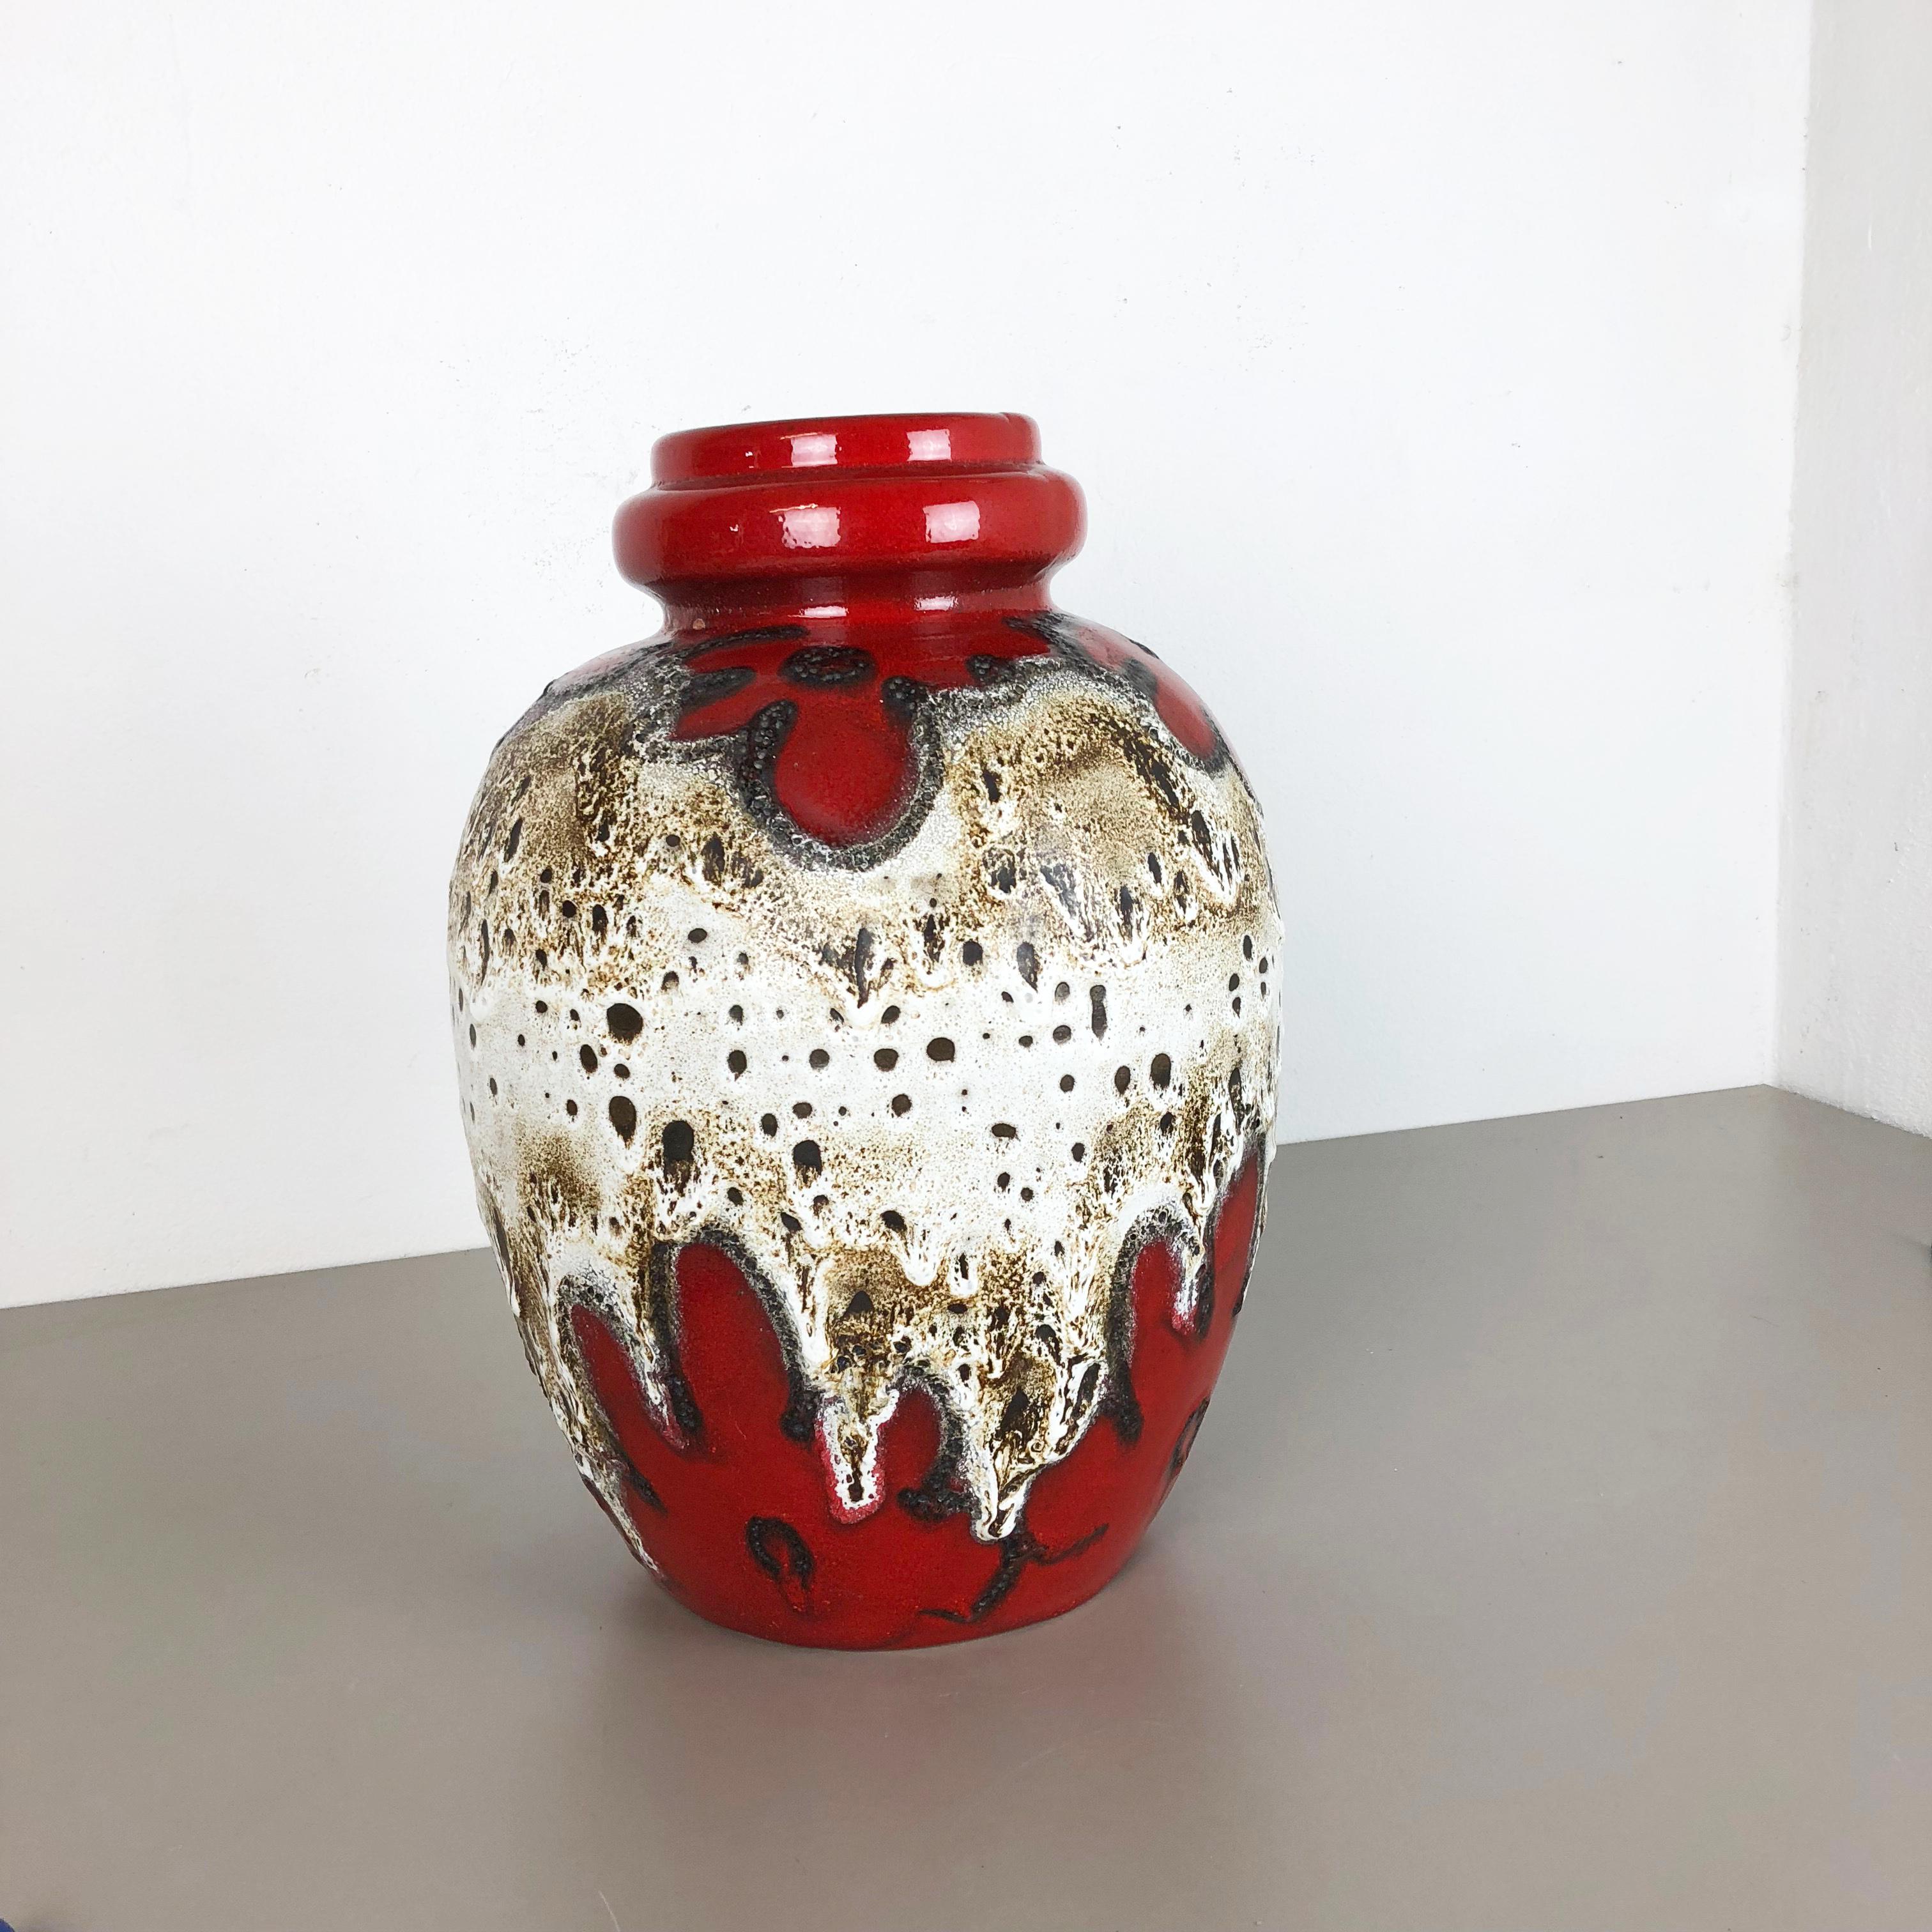 Article:

Fat lava art vase XXXL version


Model: 280-42


Producer:

Scheurich, Germany



Decade:

1970s


Description:

This original vintage vase was produced in the 1970s in Germany. it is made of ceramic pottery in fat